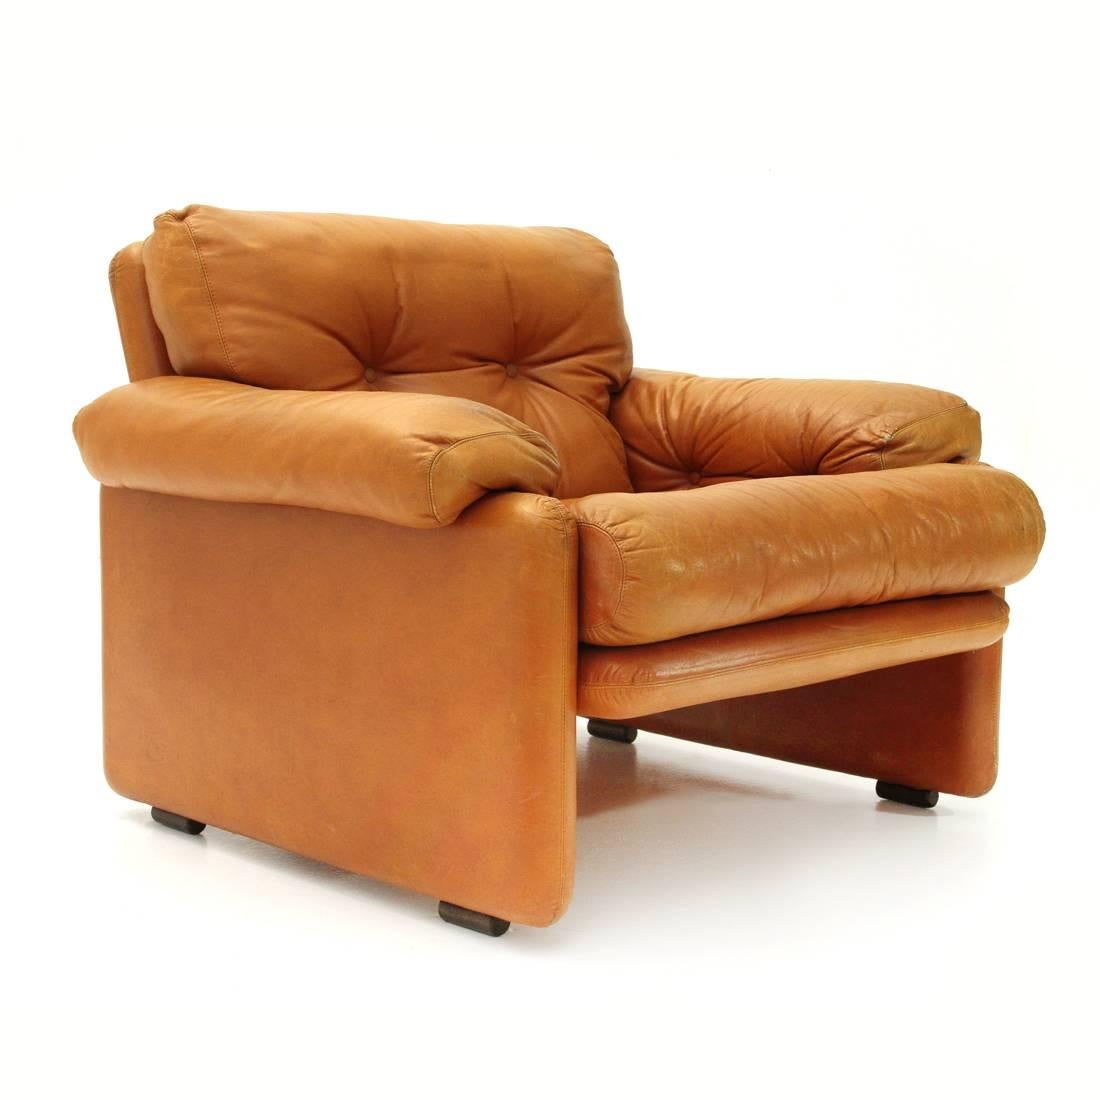 Armchair produced by B & B Italia in the 1960s on a project by Tobia Scarpa.
Metal structure padded and lined in leather.
Backrest, seat and armrests padded and stitched with buttons.
Good general conditions, some signs due to normal use over